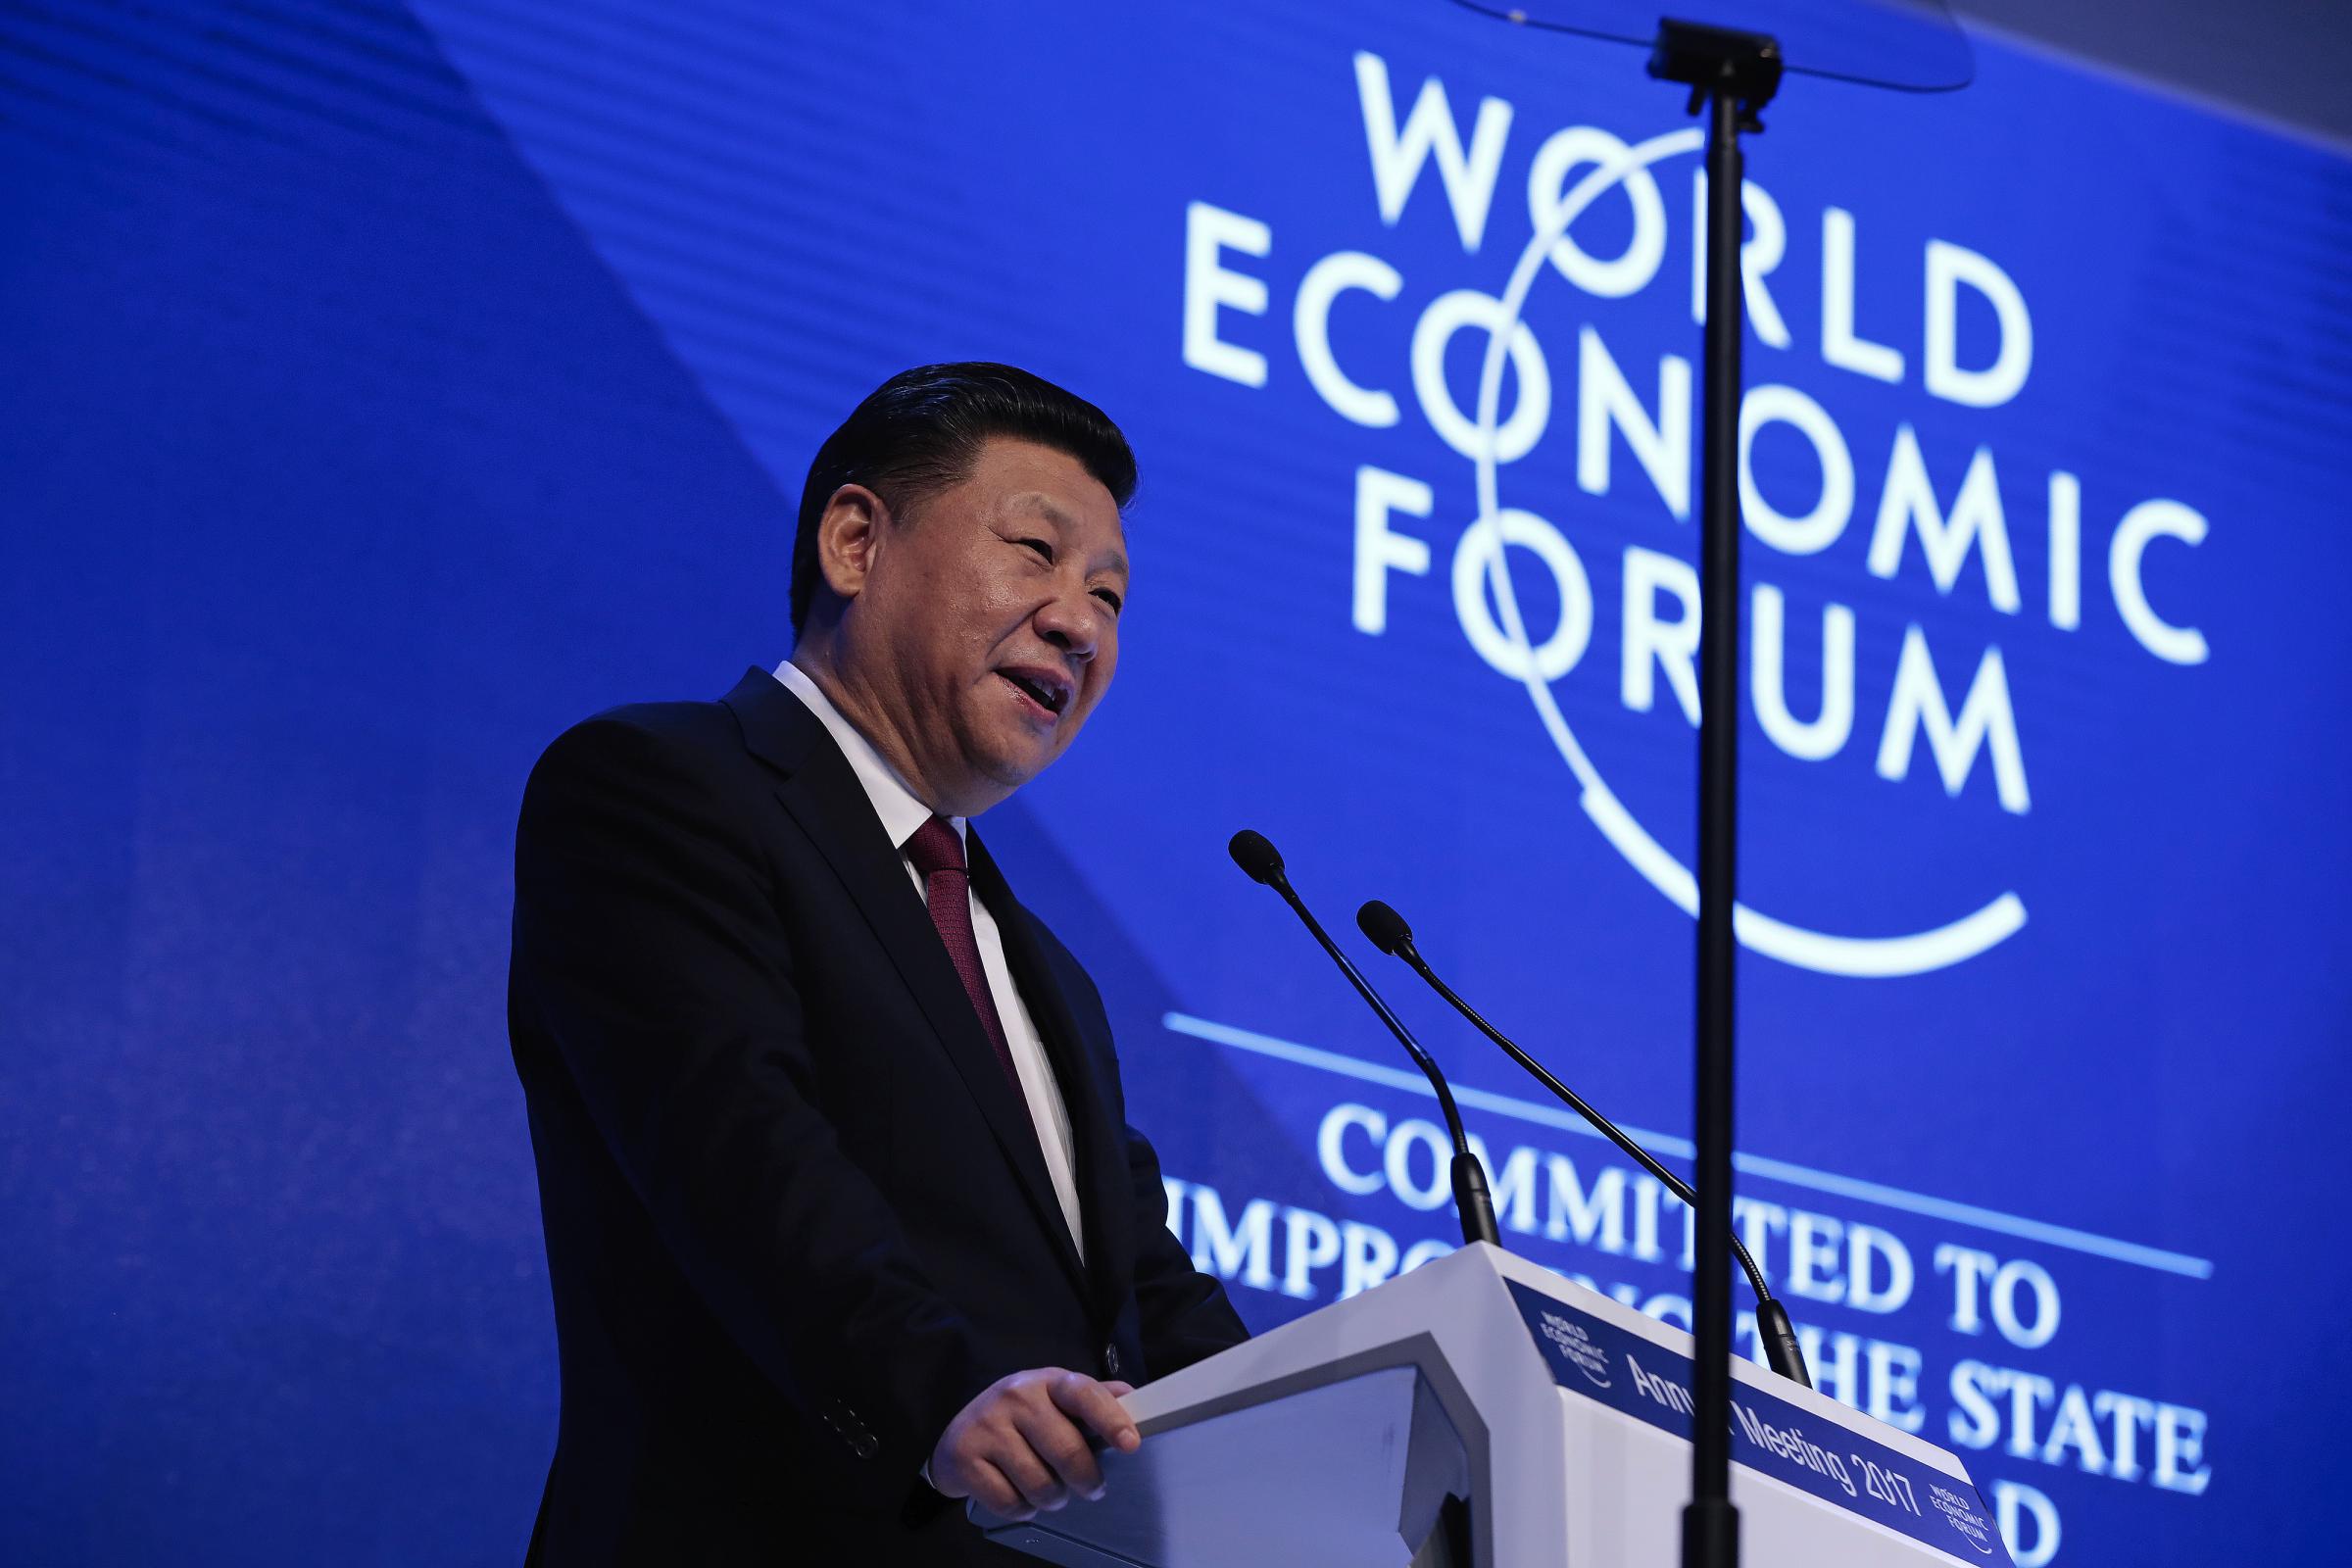 China's President Xi Jinping Delivers Opening Speech At The World Economic Forum (WEF) 2017